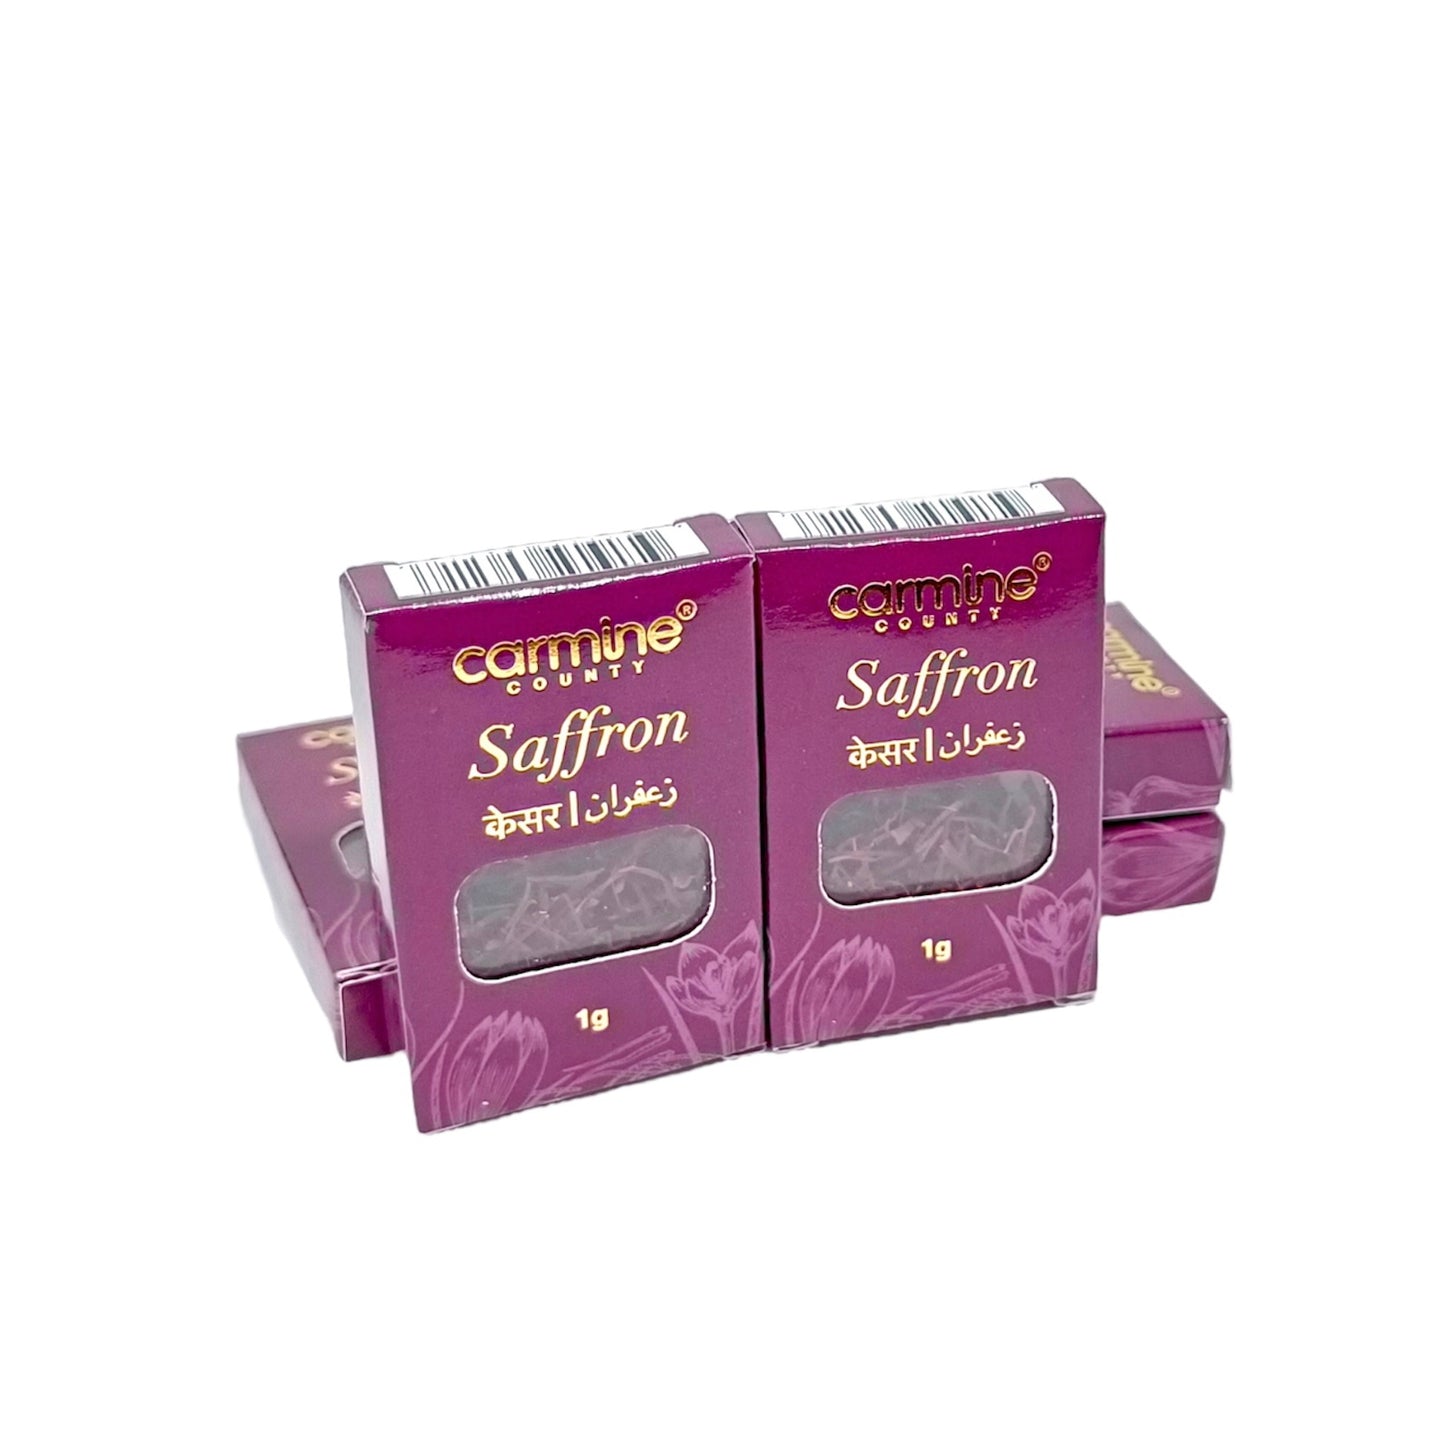 Carmine County Pure and Natural Saffron Threads 1g, Economy Pack